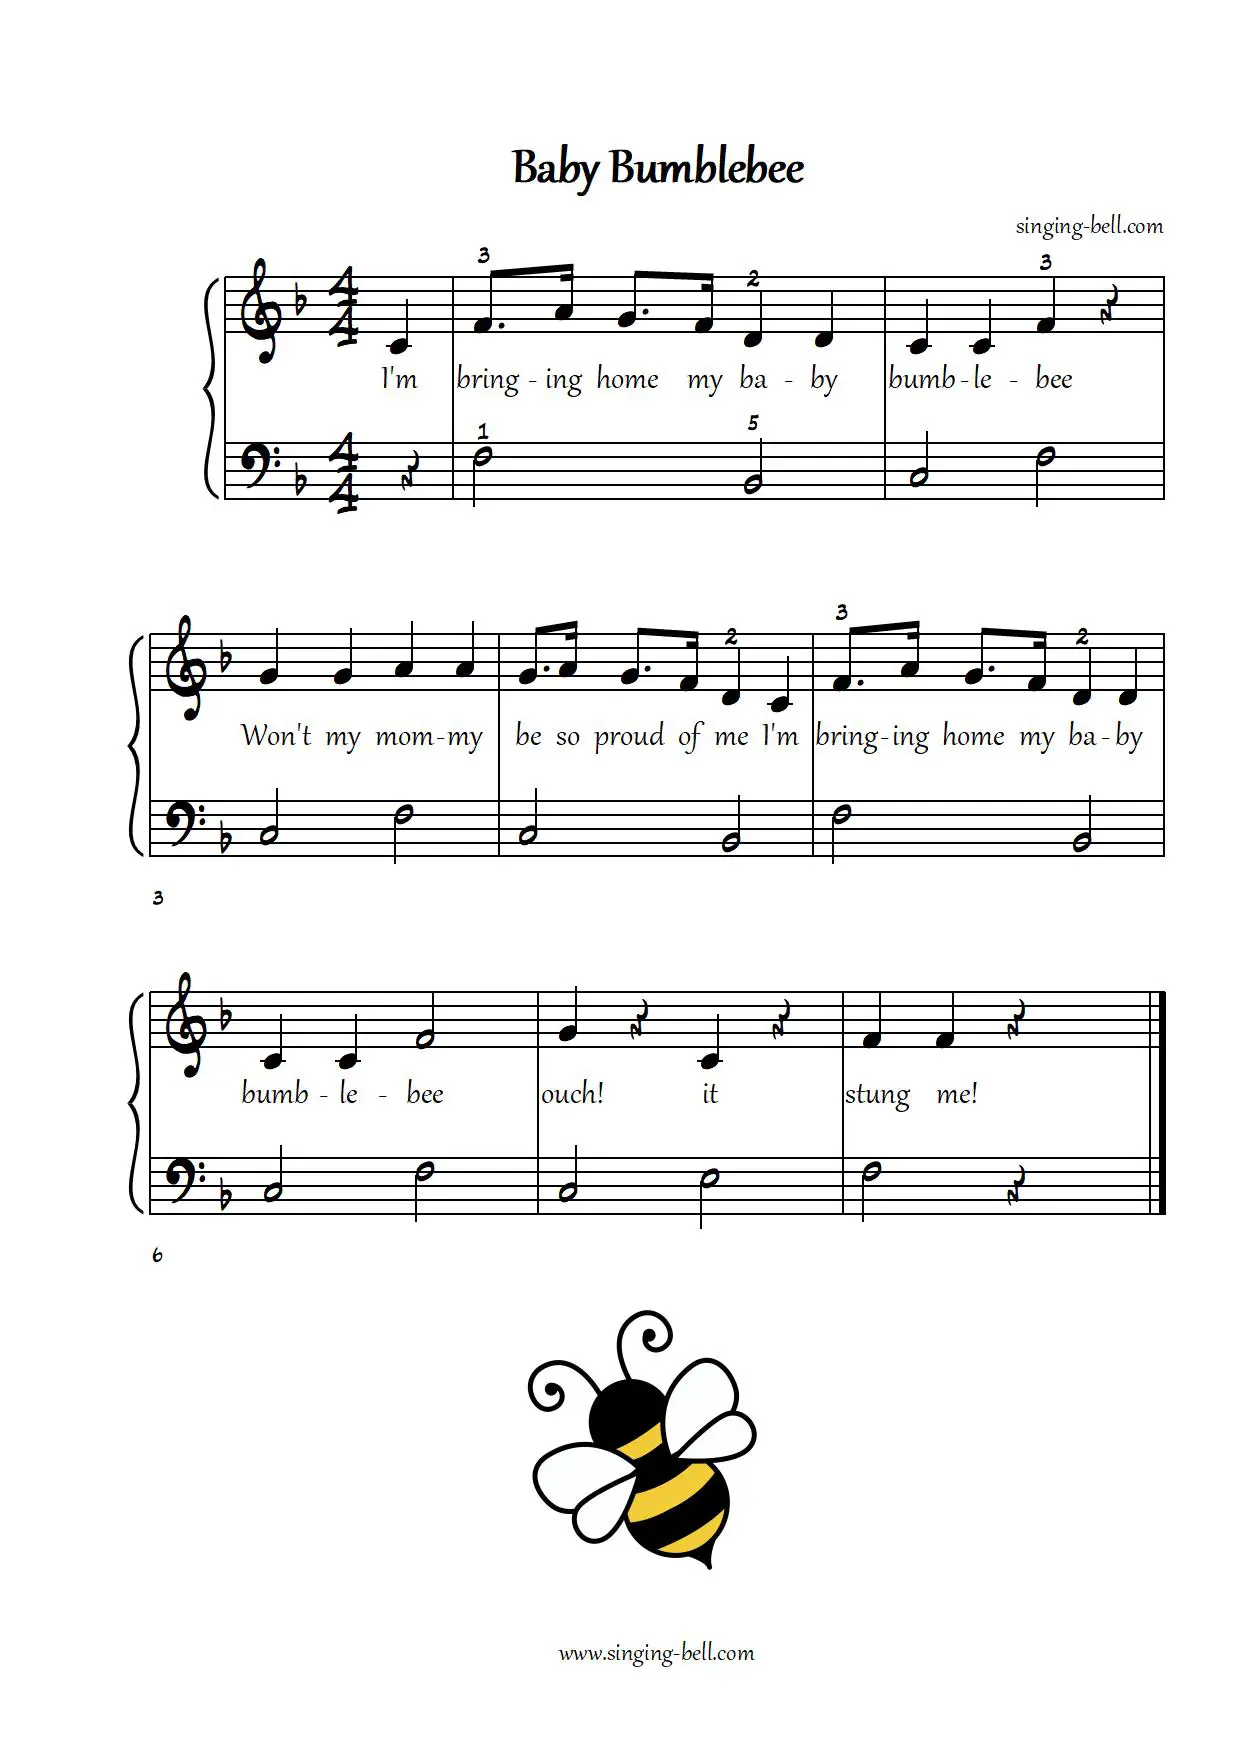 Baby Bumblebee easy piano sheet music notes beginners pdf